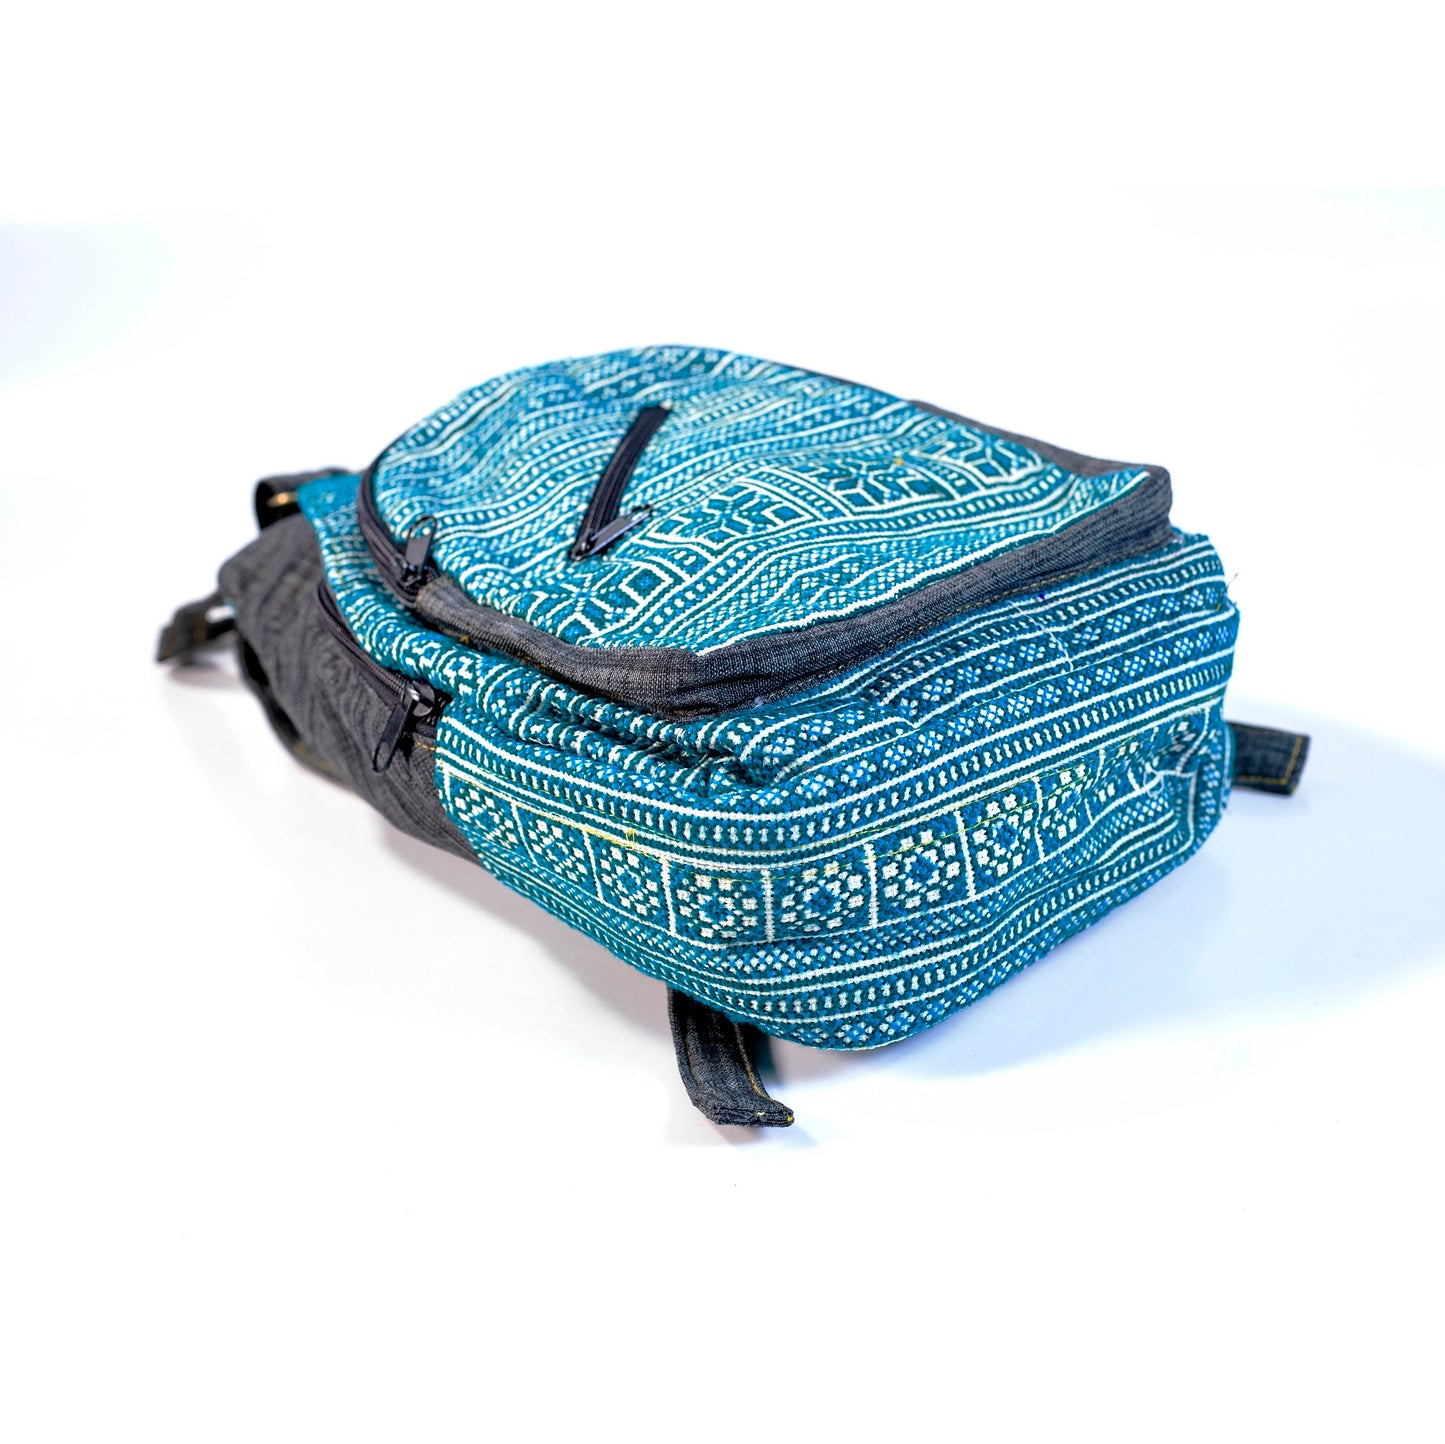 Multi-purpose backpack and sling, light blue hand-embroidery fabric, dark blue trim